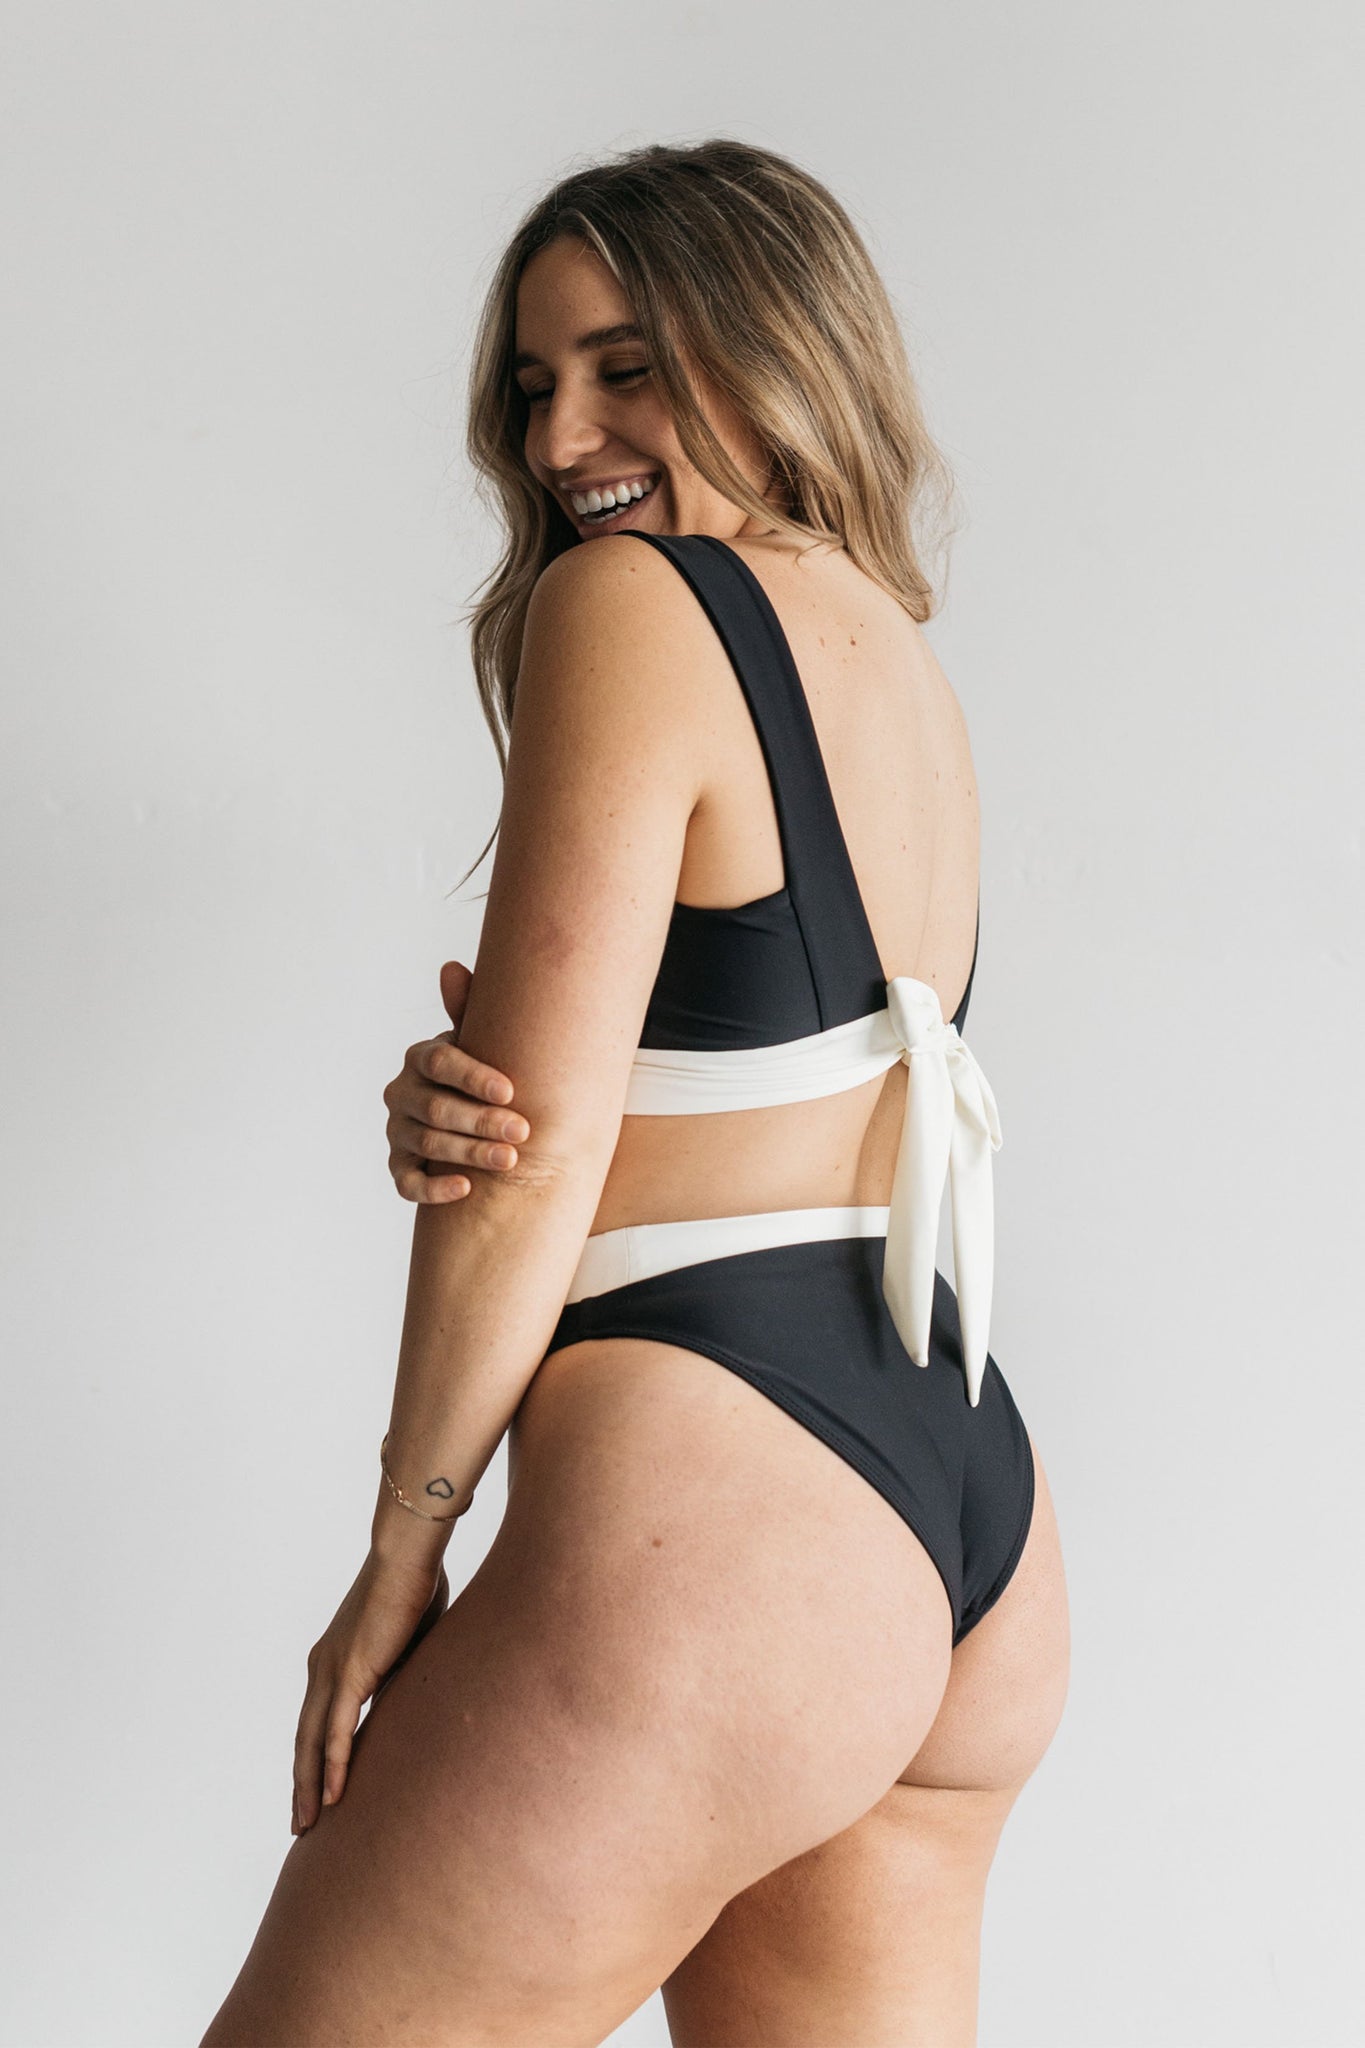 A woman laughing and standing with one arm wrapped around the other wearing high waisted black bikini bottoms with a white waistband and a matching black bikini top with an adjustable tie.